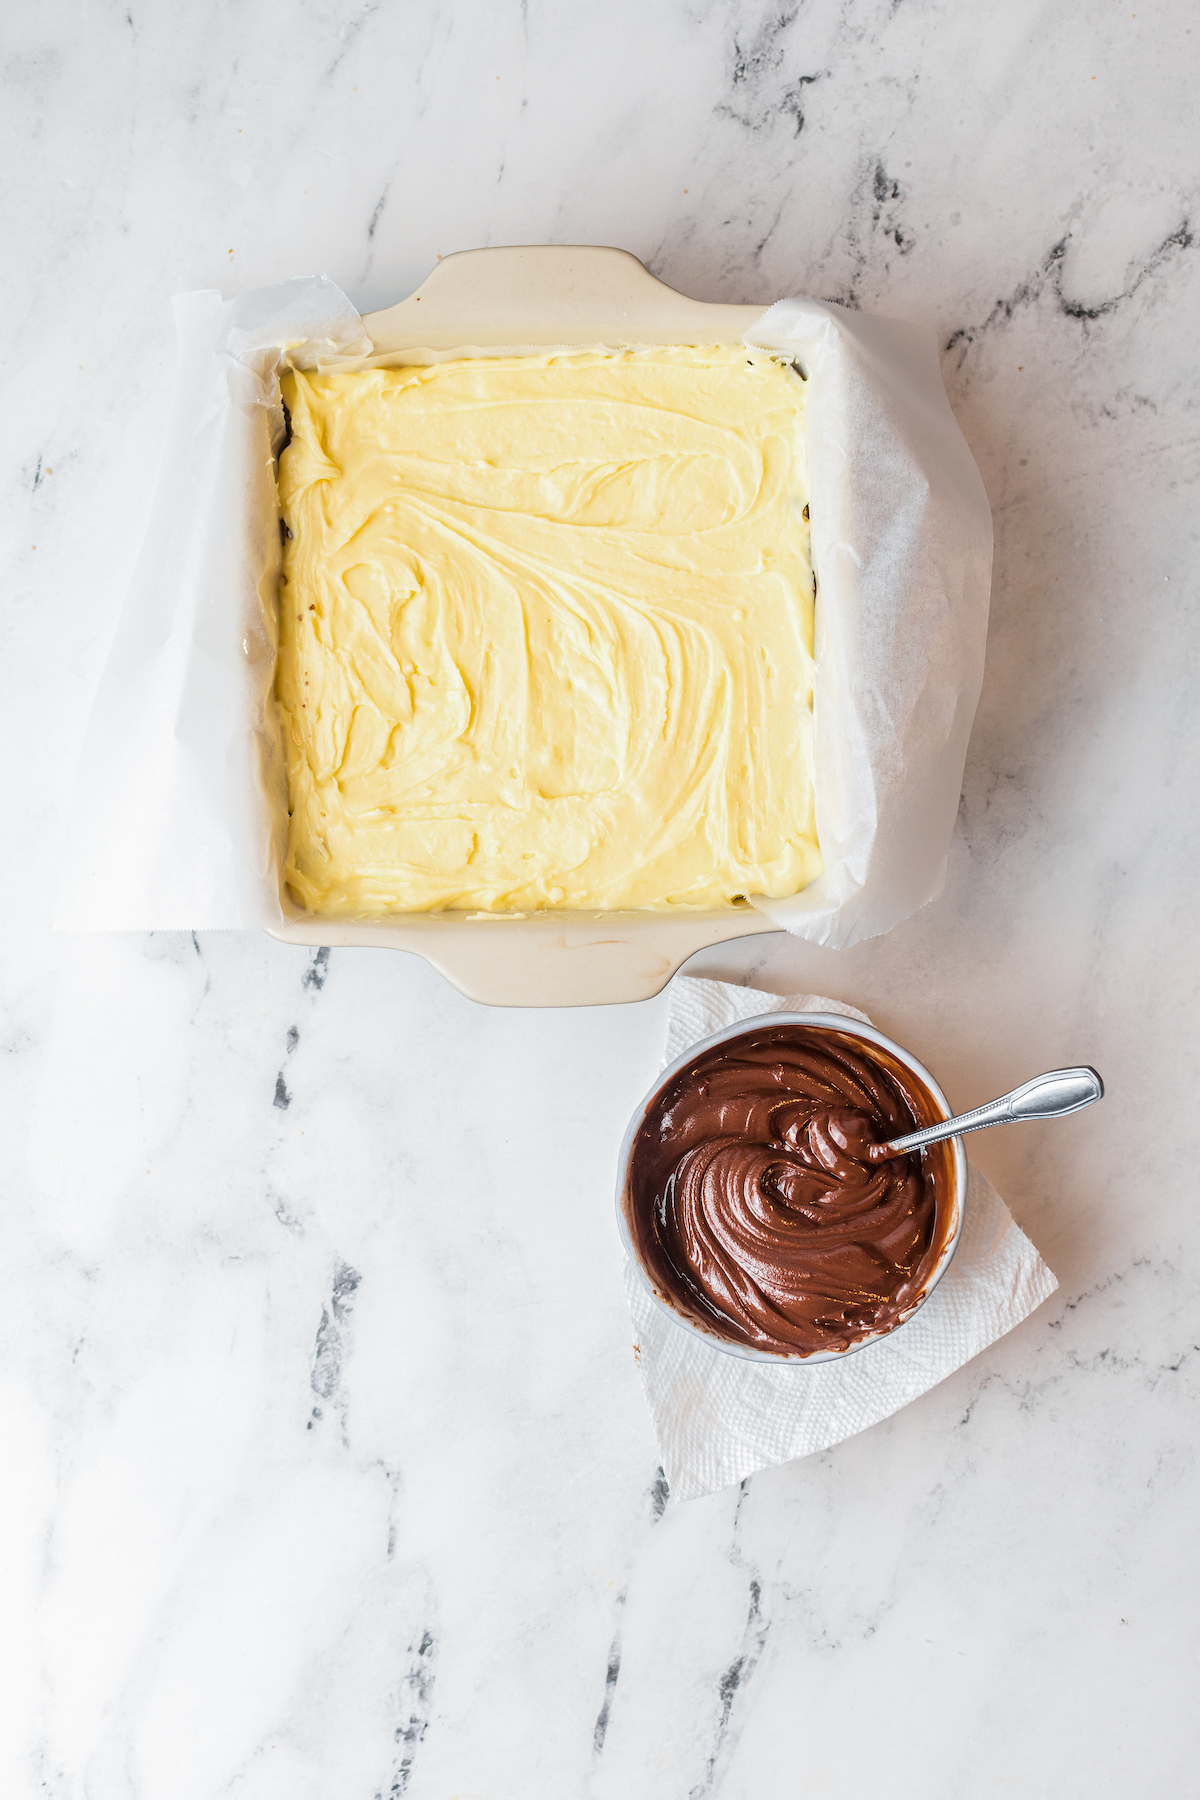 A baking dish with a layer of custard spread inside. Nearby is a bowl of melted chocolate.